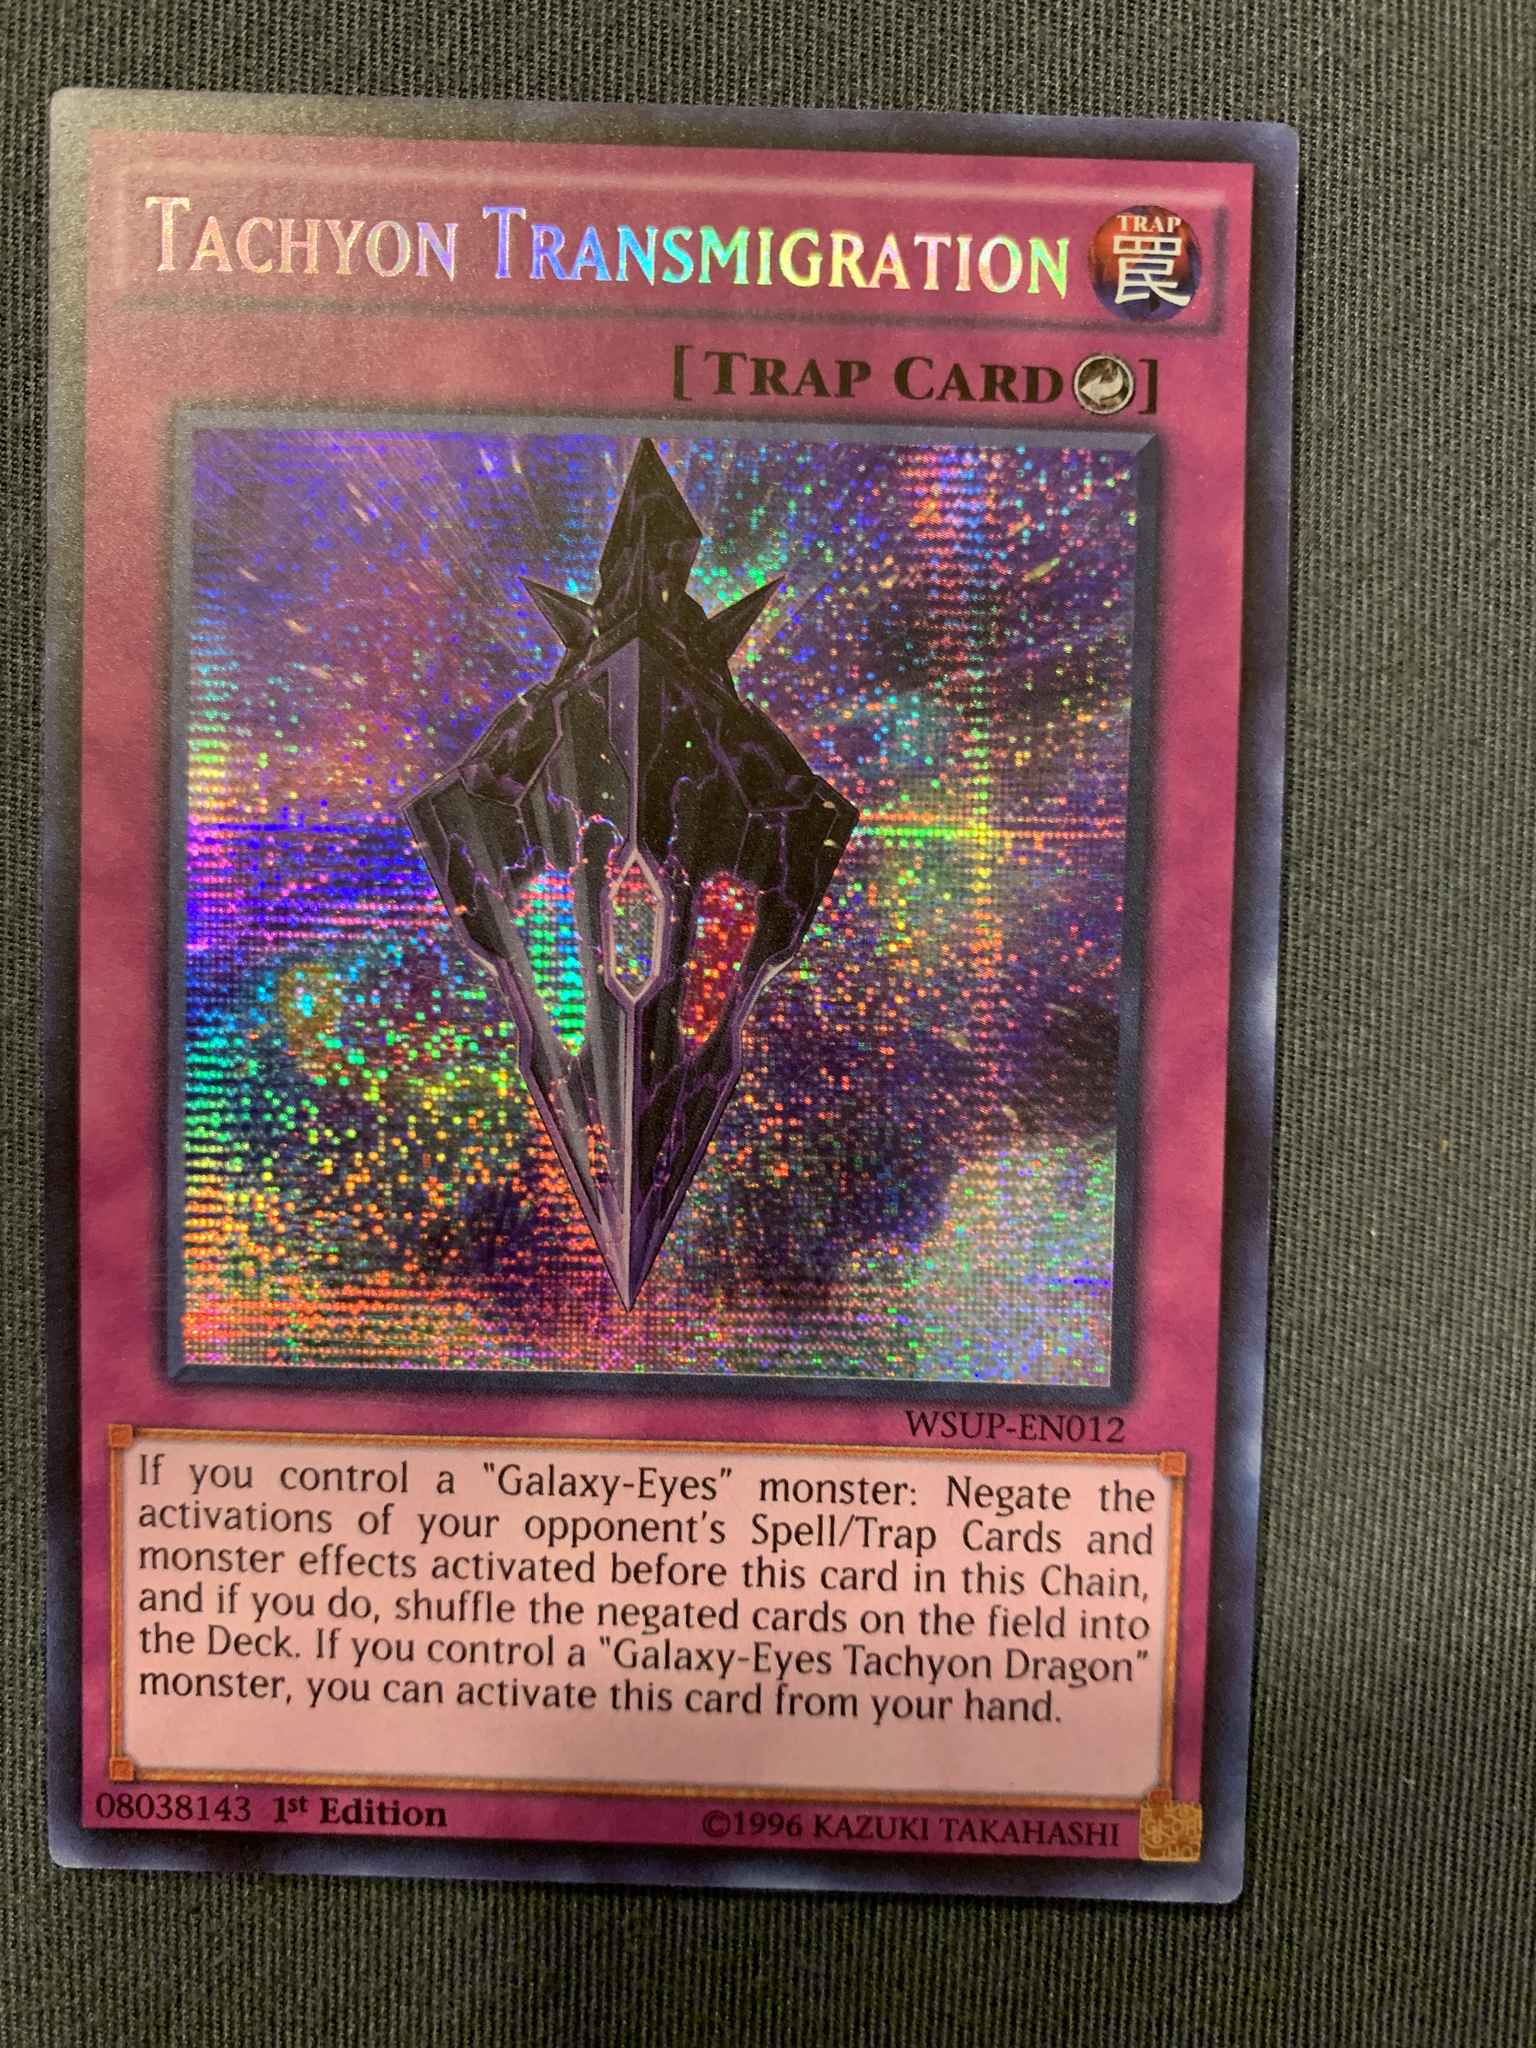 Tachyon Transmigration : Tachyon Transmigration - World Superstars, YuGiOh  - Online Gaming Store for Cards, Miniatures, Singles, Packs & Booster Boxes